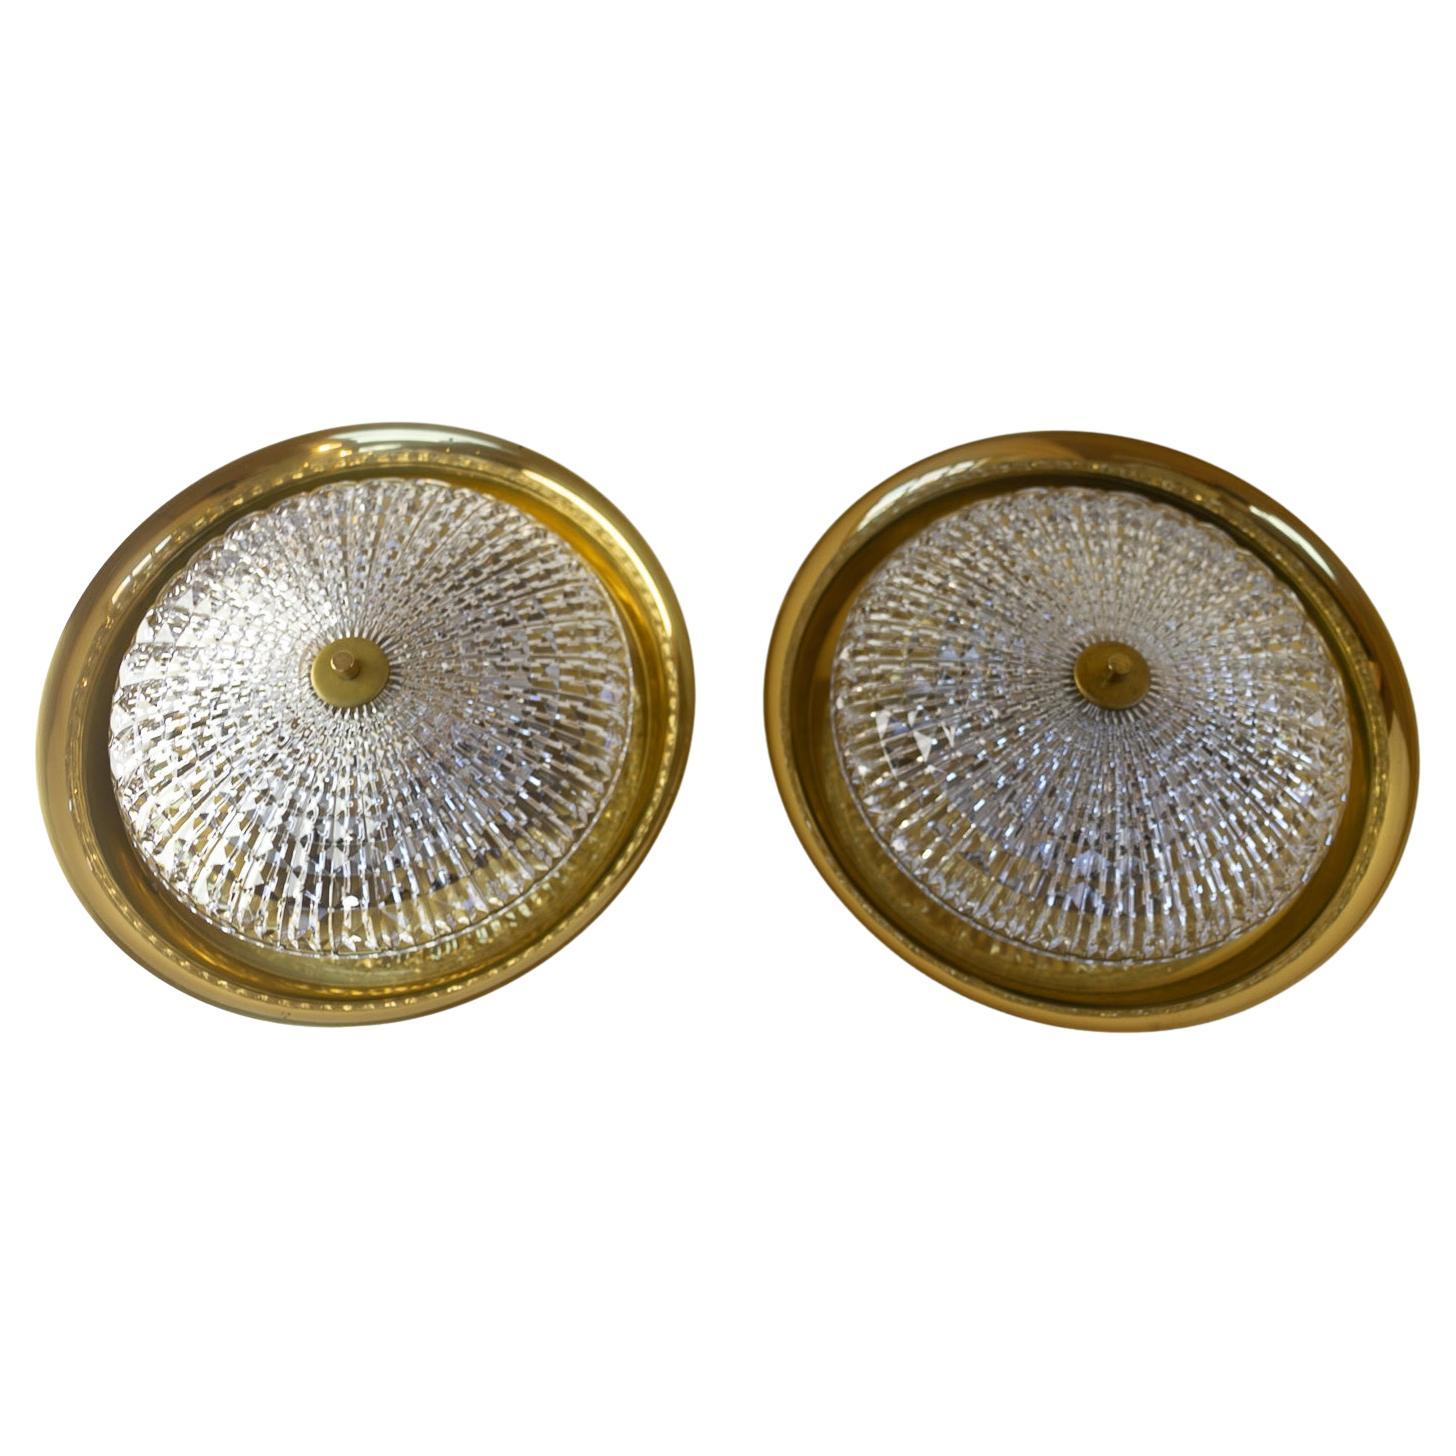 Orrefors Brass Wall or Ceiling Lamps by Fagerlund for Lyfa, 1960s. Set of 2.